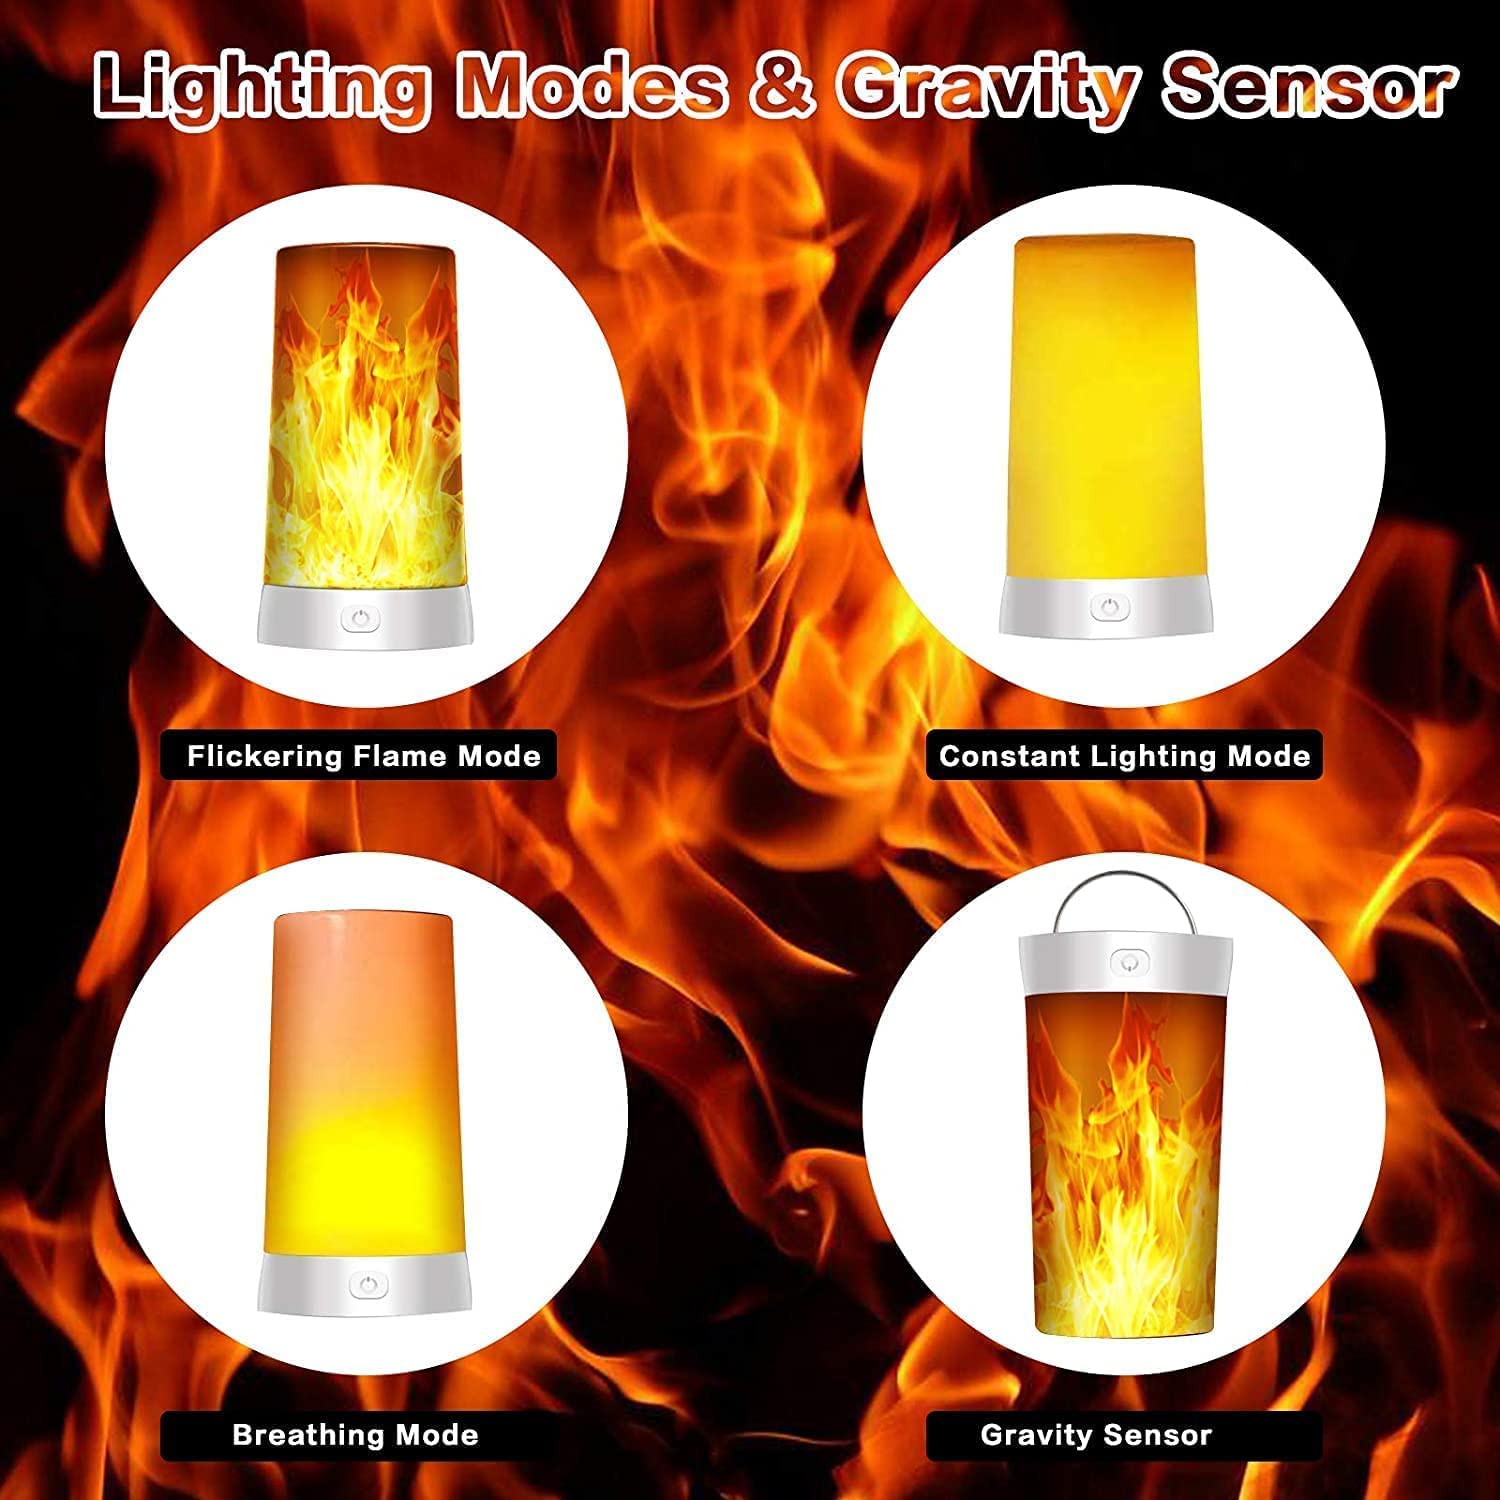 LED Flame Lights, Battery Operated Flameless Candles, Flickering Fake Fire Lamps with Remote Control and Timer, Waterproof Outdoor Flame Lights with Gravity Sensing for Fireplace/Party/Garden/Bar - image 2 of 8